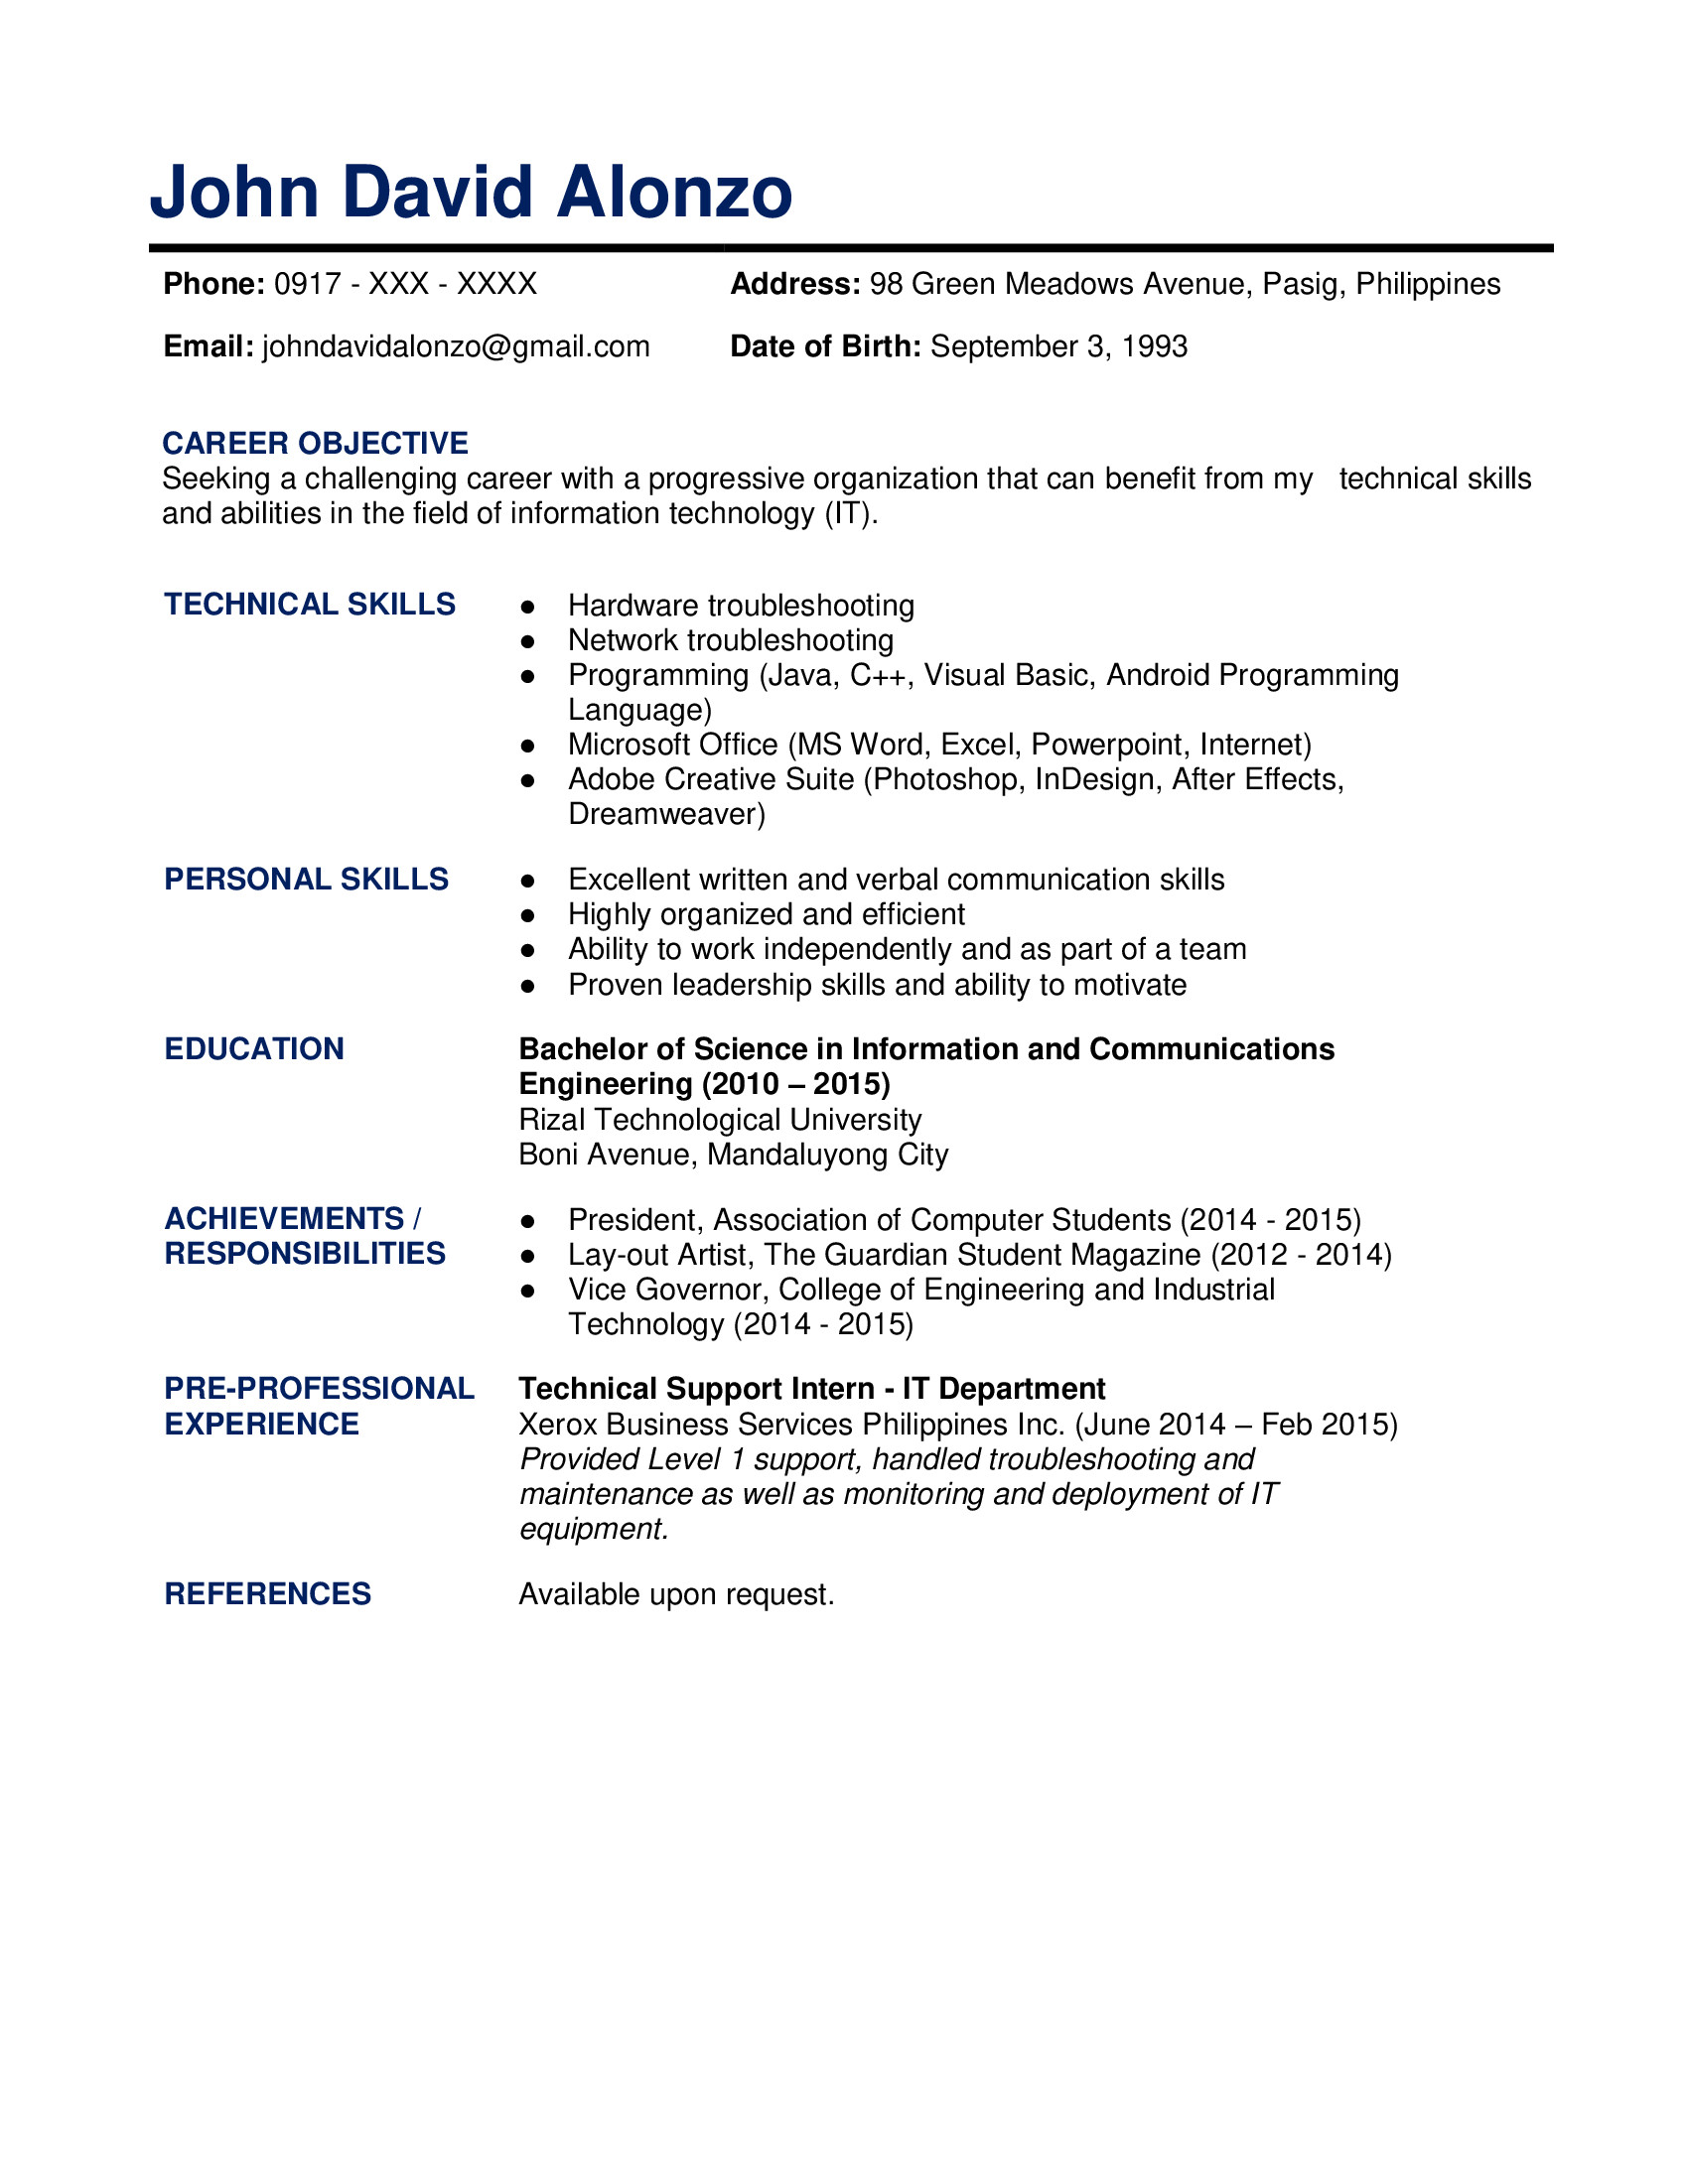 Indeed Sample Resume for Cost Accountant Sample Resume formats for Fresh Graduates